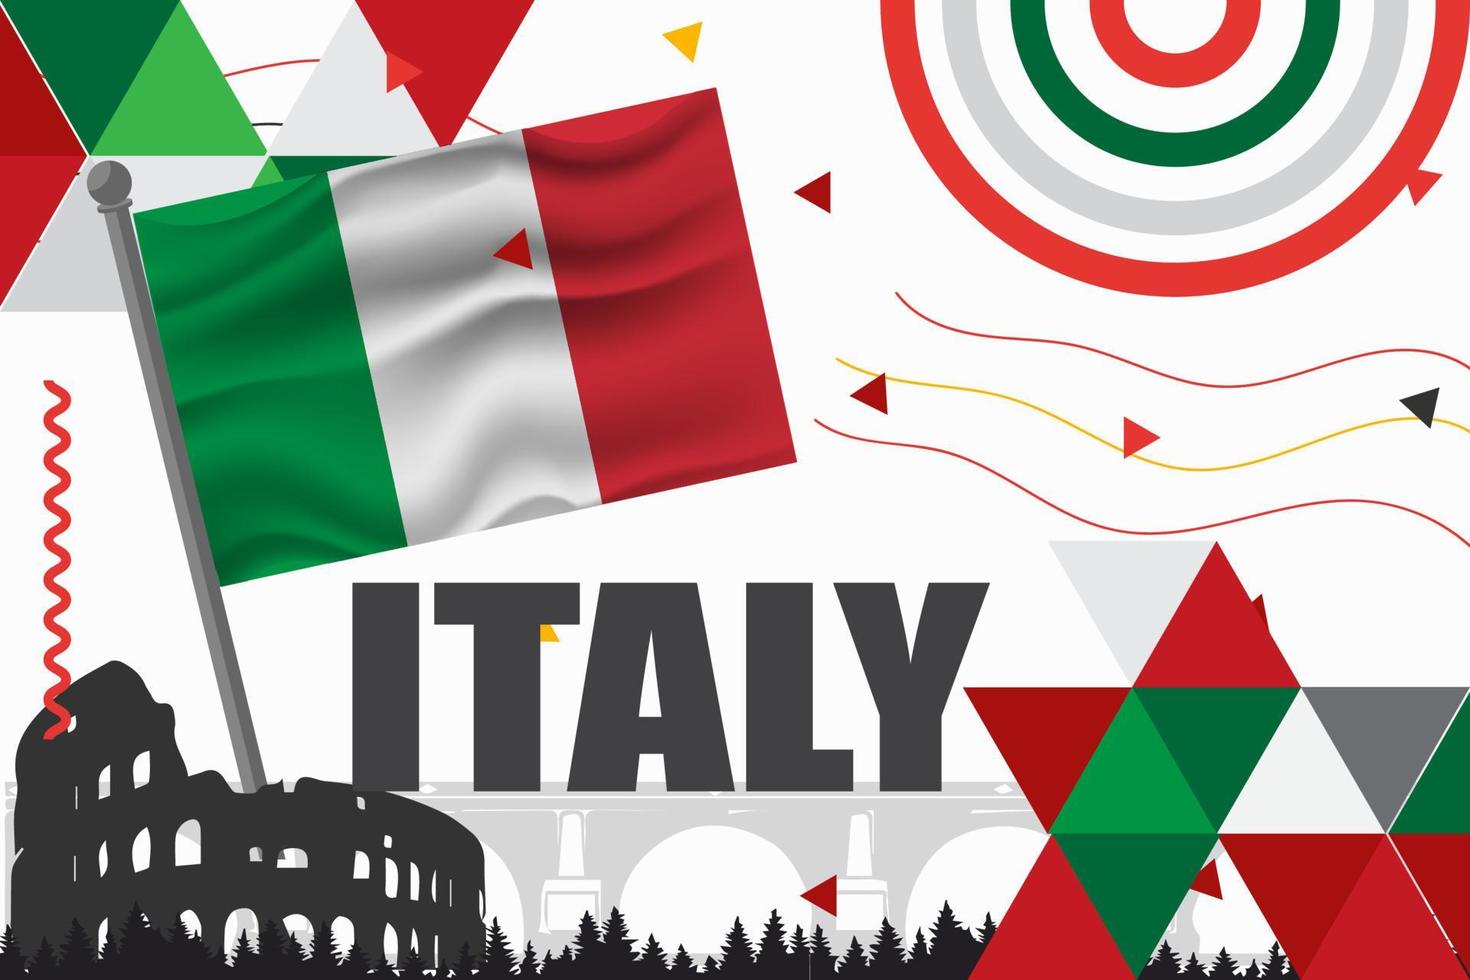 Italia national day banner design. Italian flag and map theme with Rome landmark background. Abstract geometric retro shapes of red and green color. Italy Vector illustration.